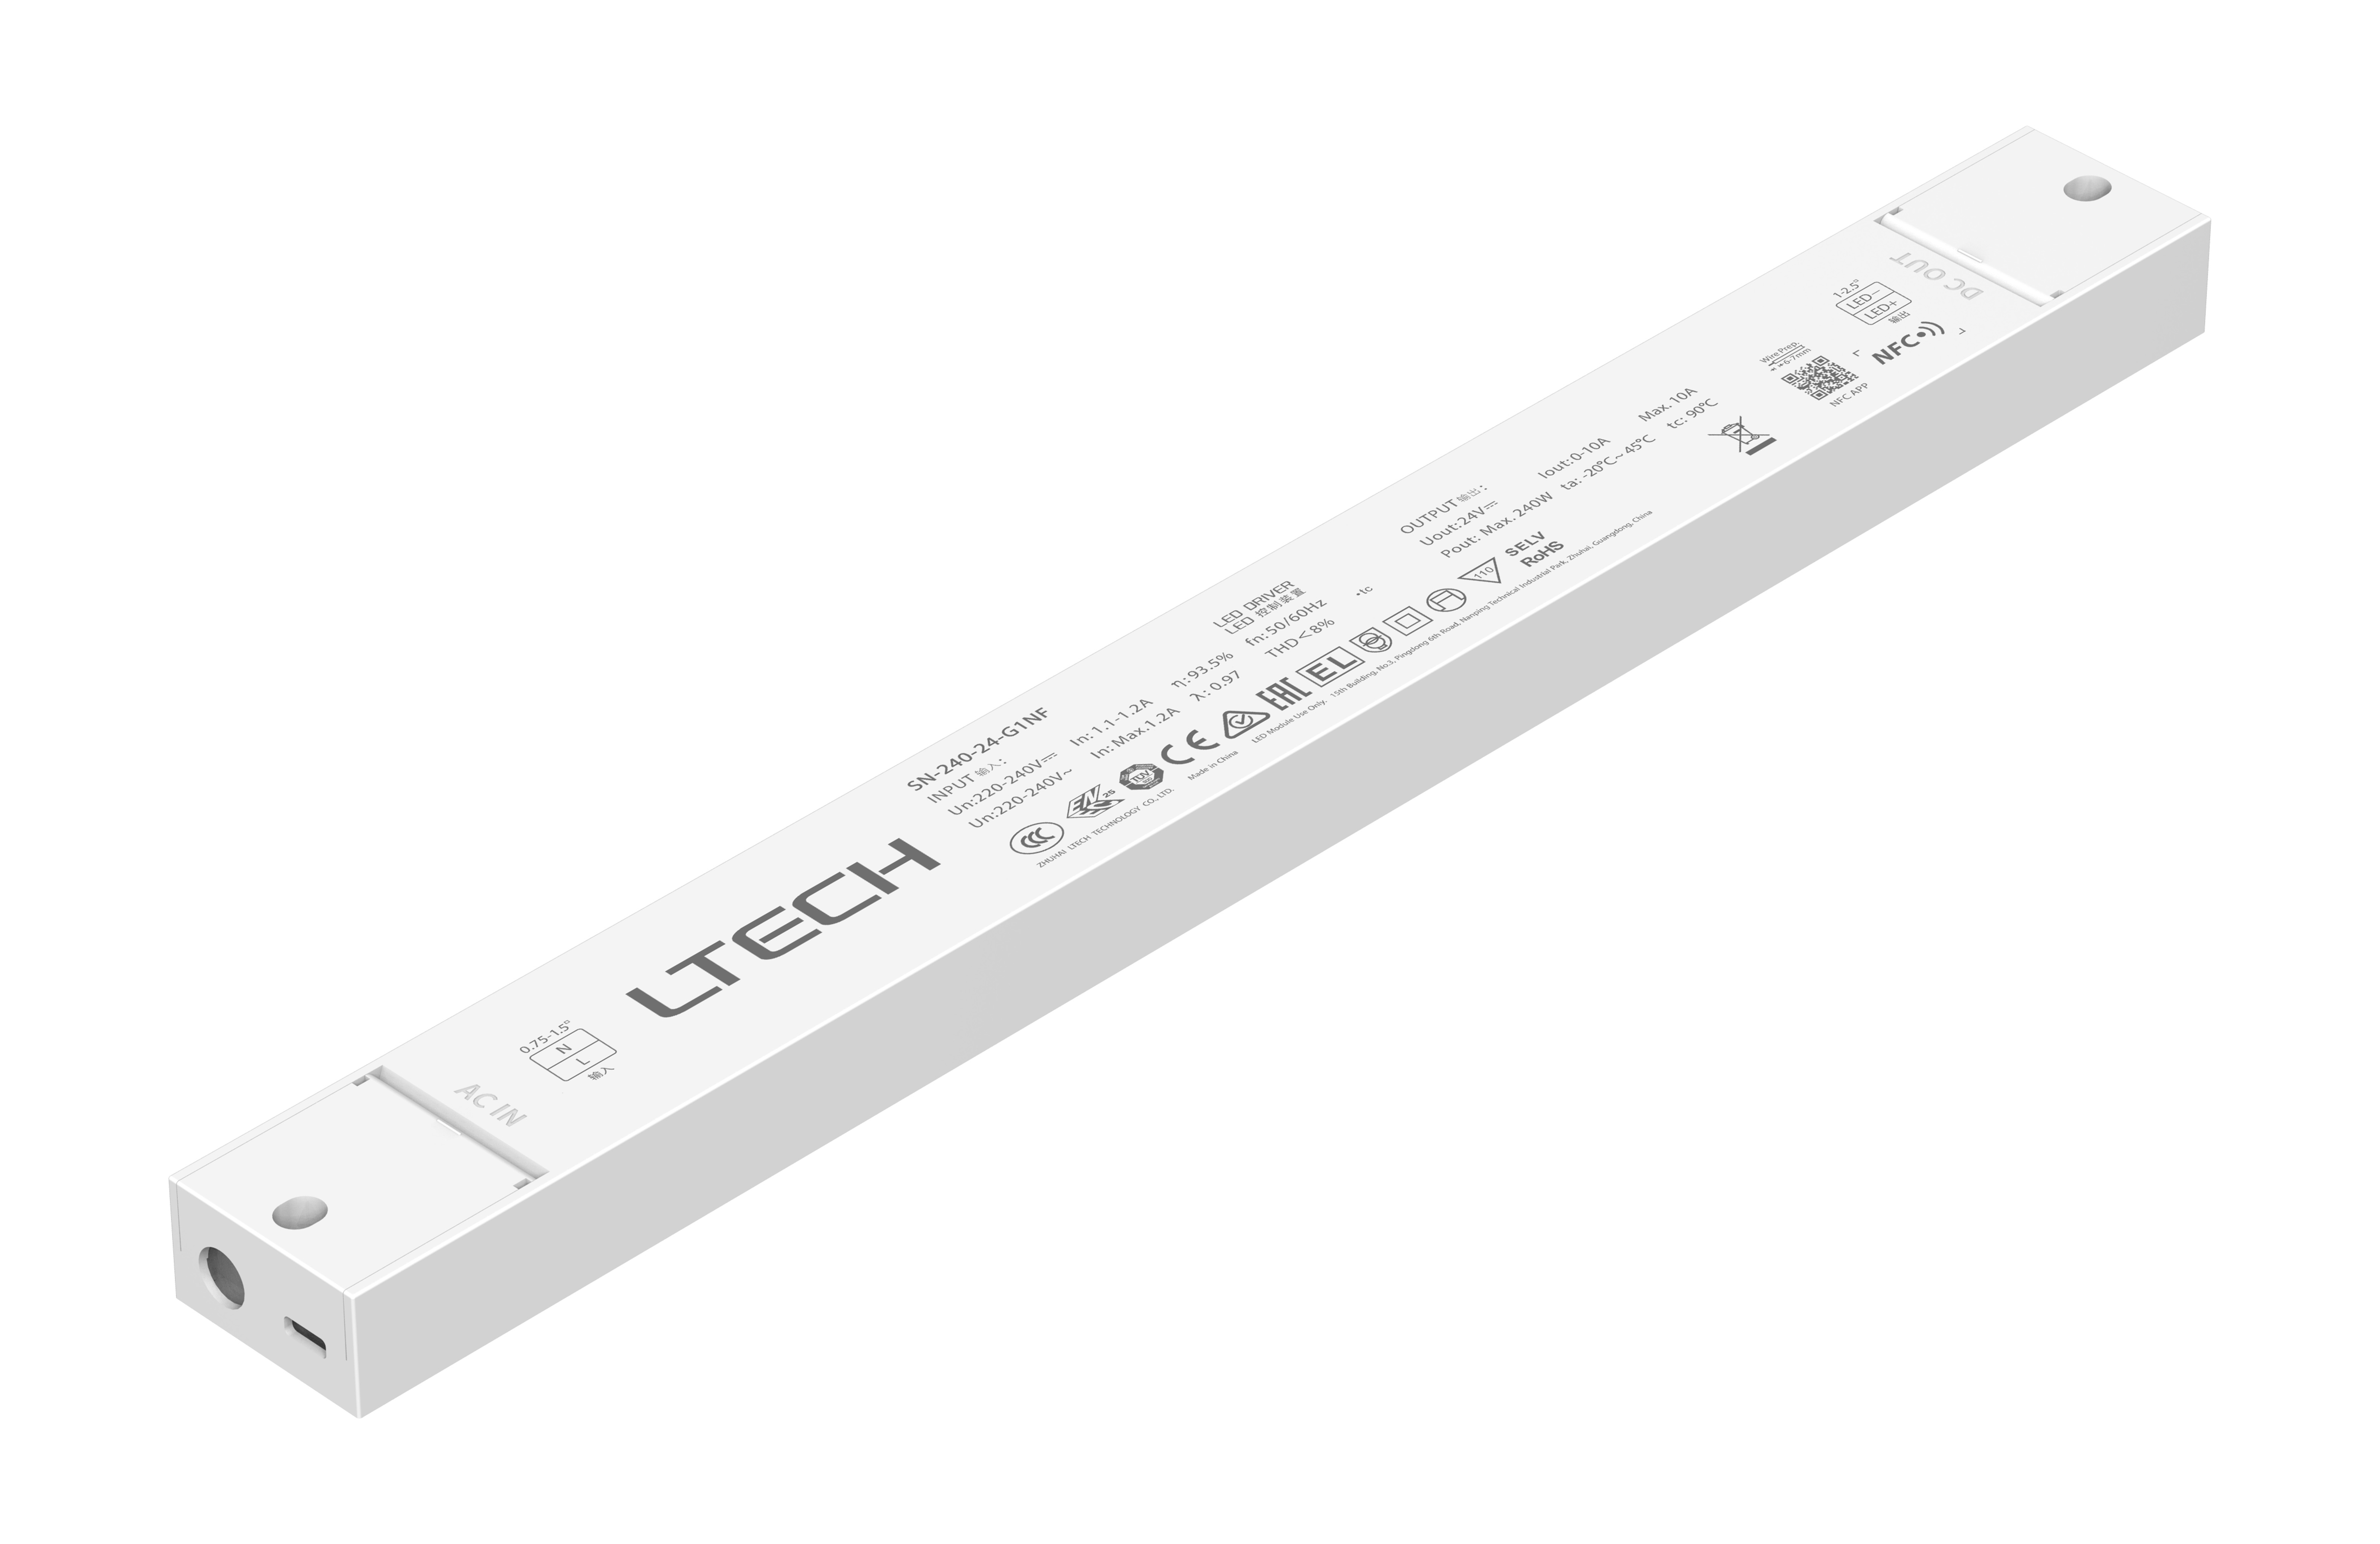 SN-240-24-G1NF-NFC  Intelligent Constant Current NFC ON/OFF LED Driver;  240W; 24VDC 10A ; 220-240Vac; IP20; 5yrs Warrenty.